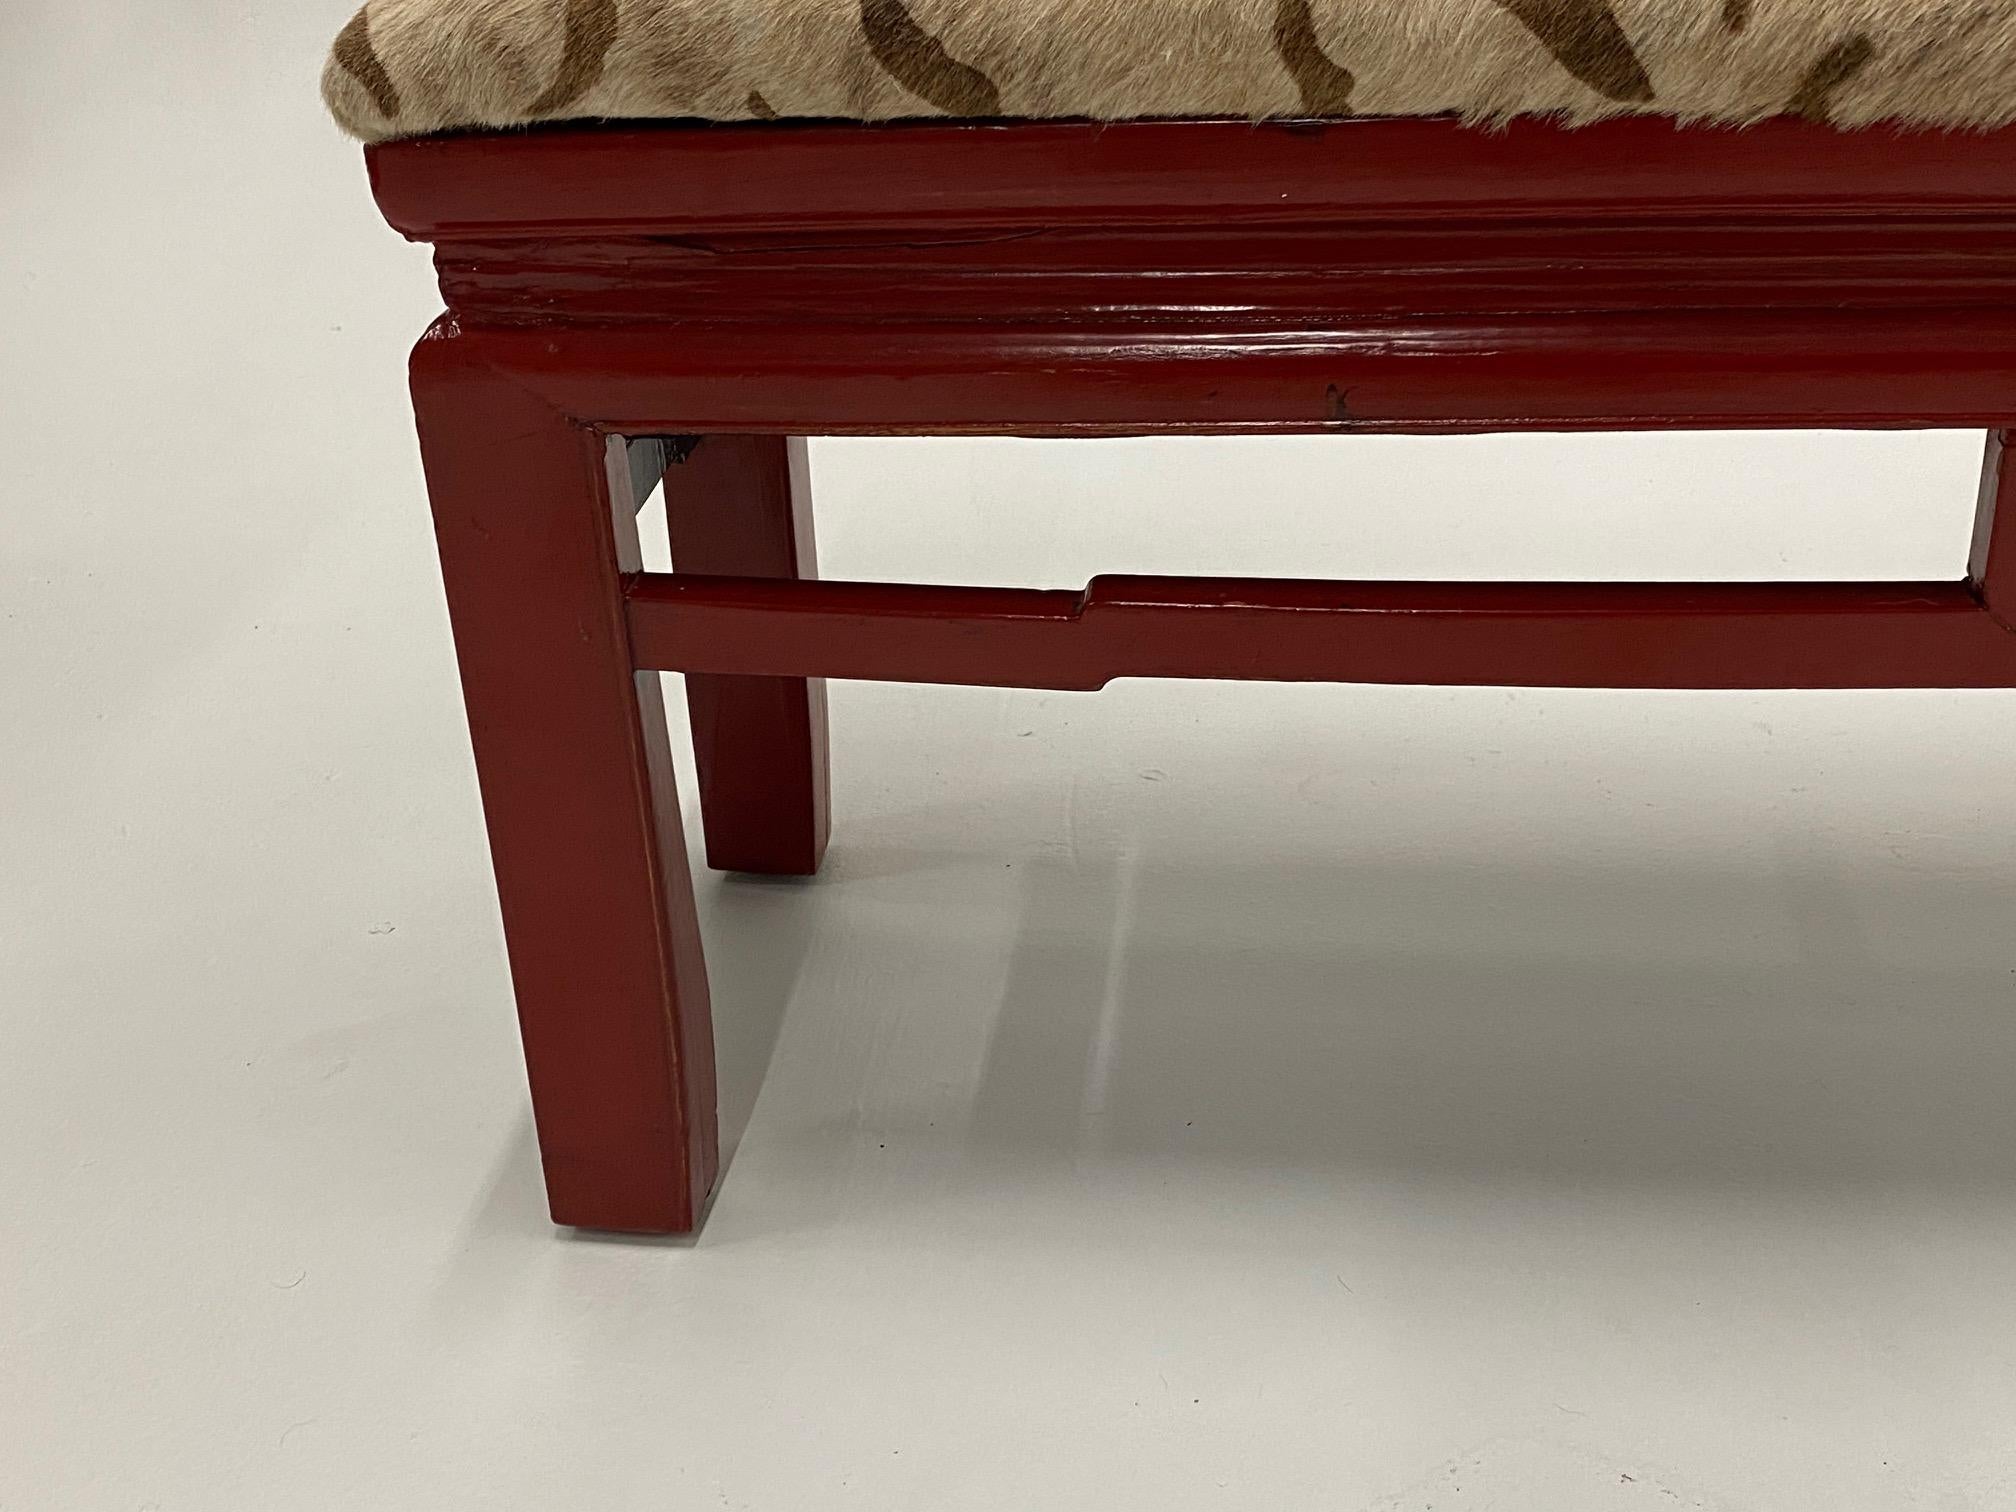 Chinese Export Stunning Asian Cinnabar Red Lacquer Bench Upholstered in Printed Cowhide For Sale